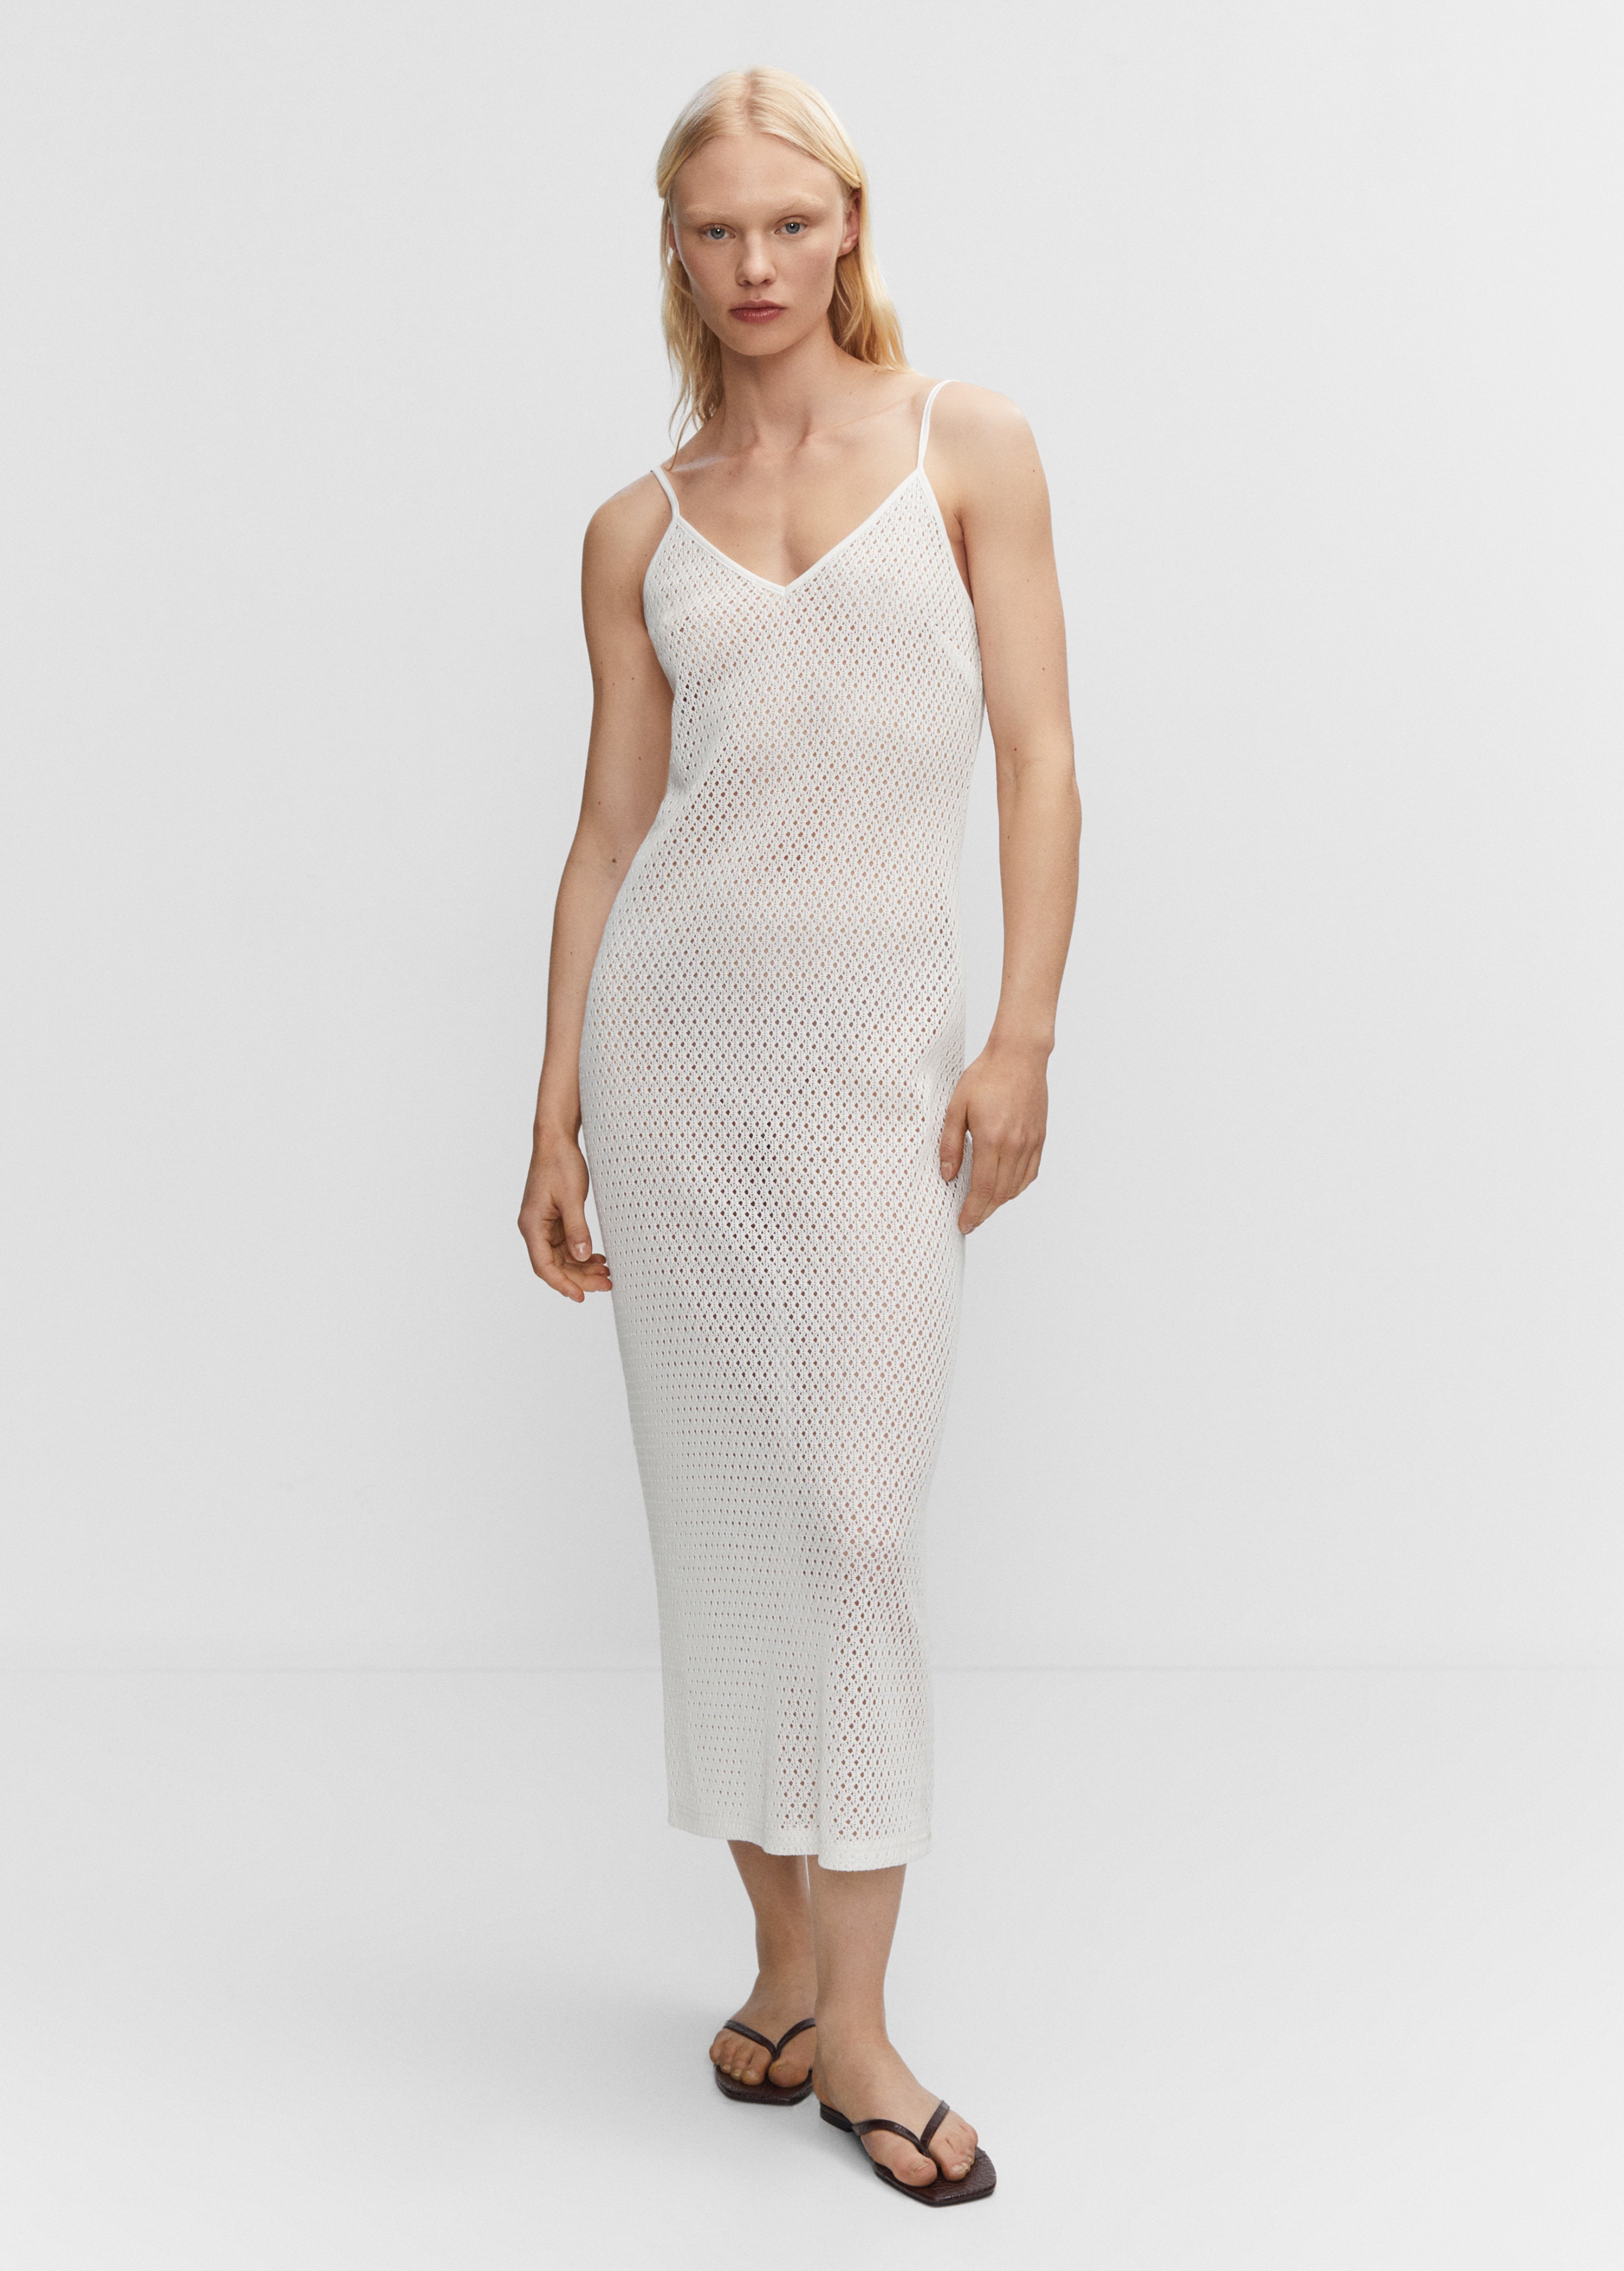 Long openwork knitted dress - General plane